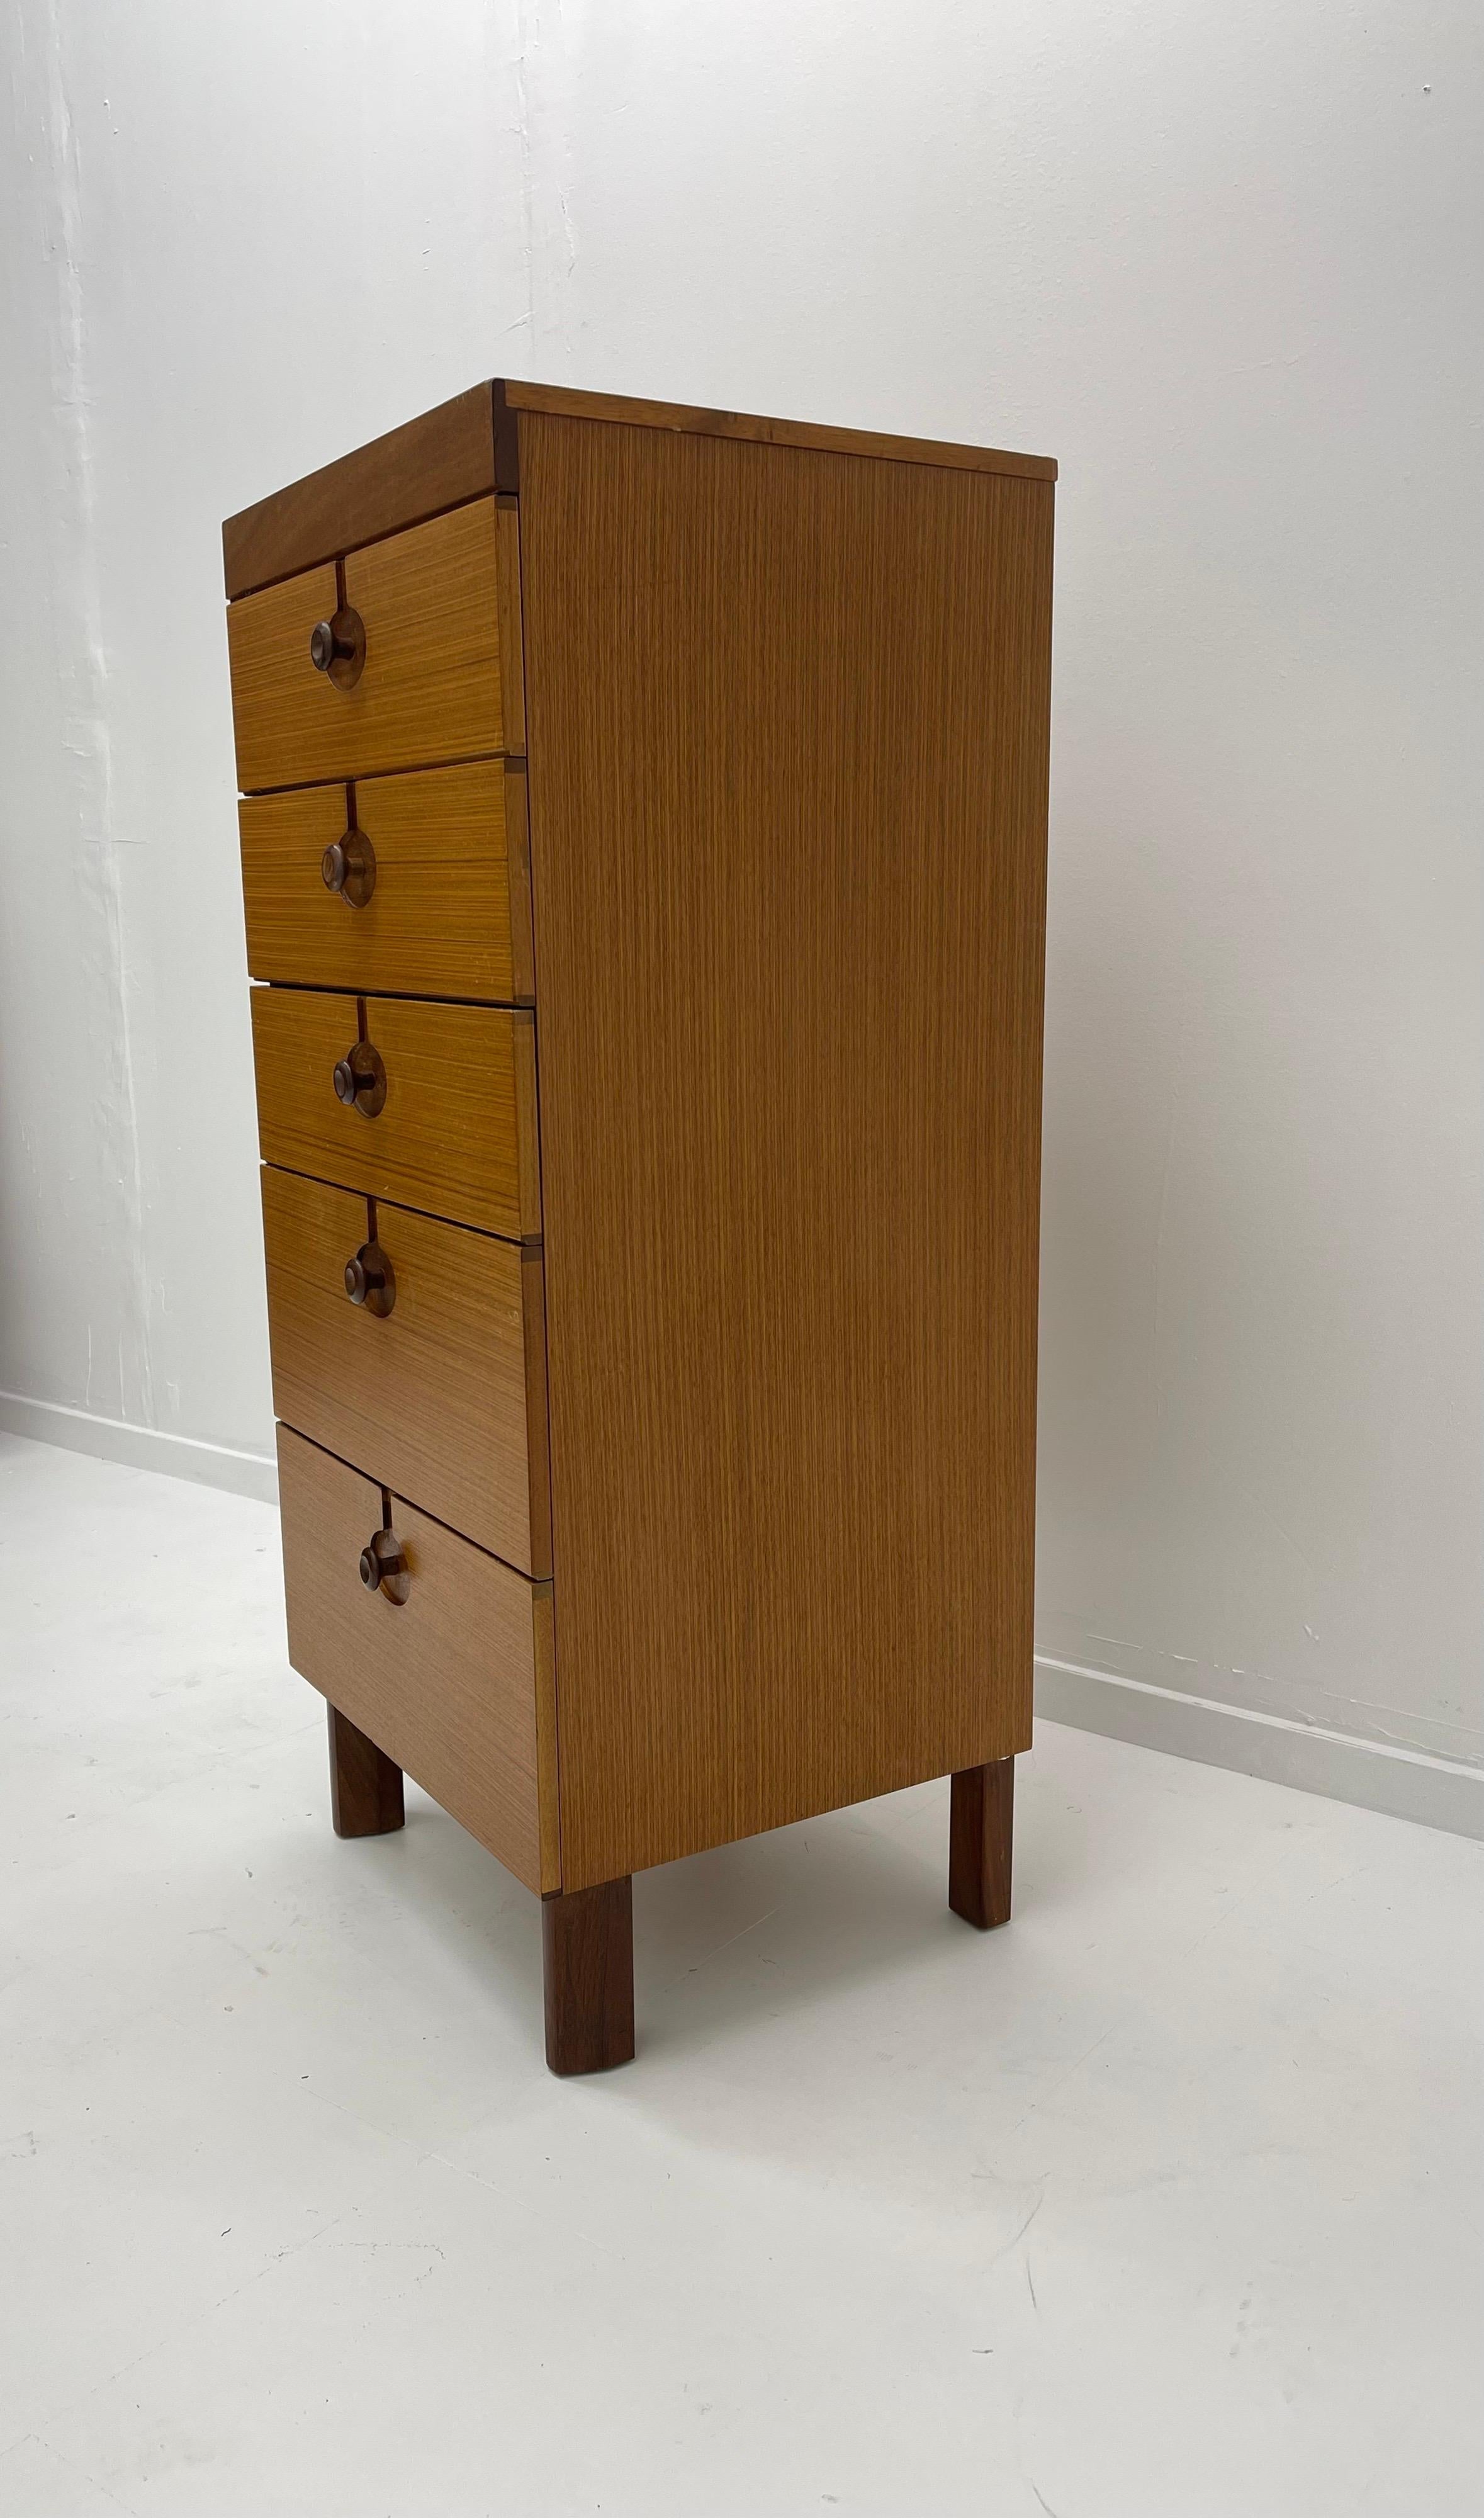 This lovely tall thin chest of drawers is perfect for any bedroom or bathroom and with five graduated sized drawers, there is ample storage space.
The round cut out central drawer handles with afromosia pulls are a lovely feature that really makes